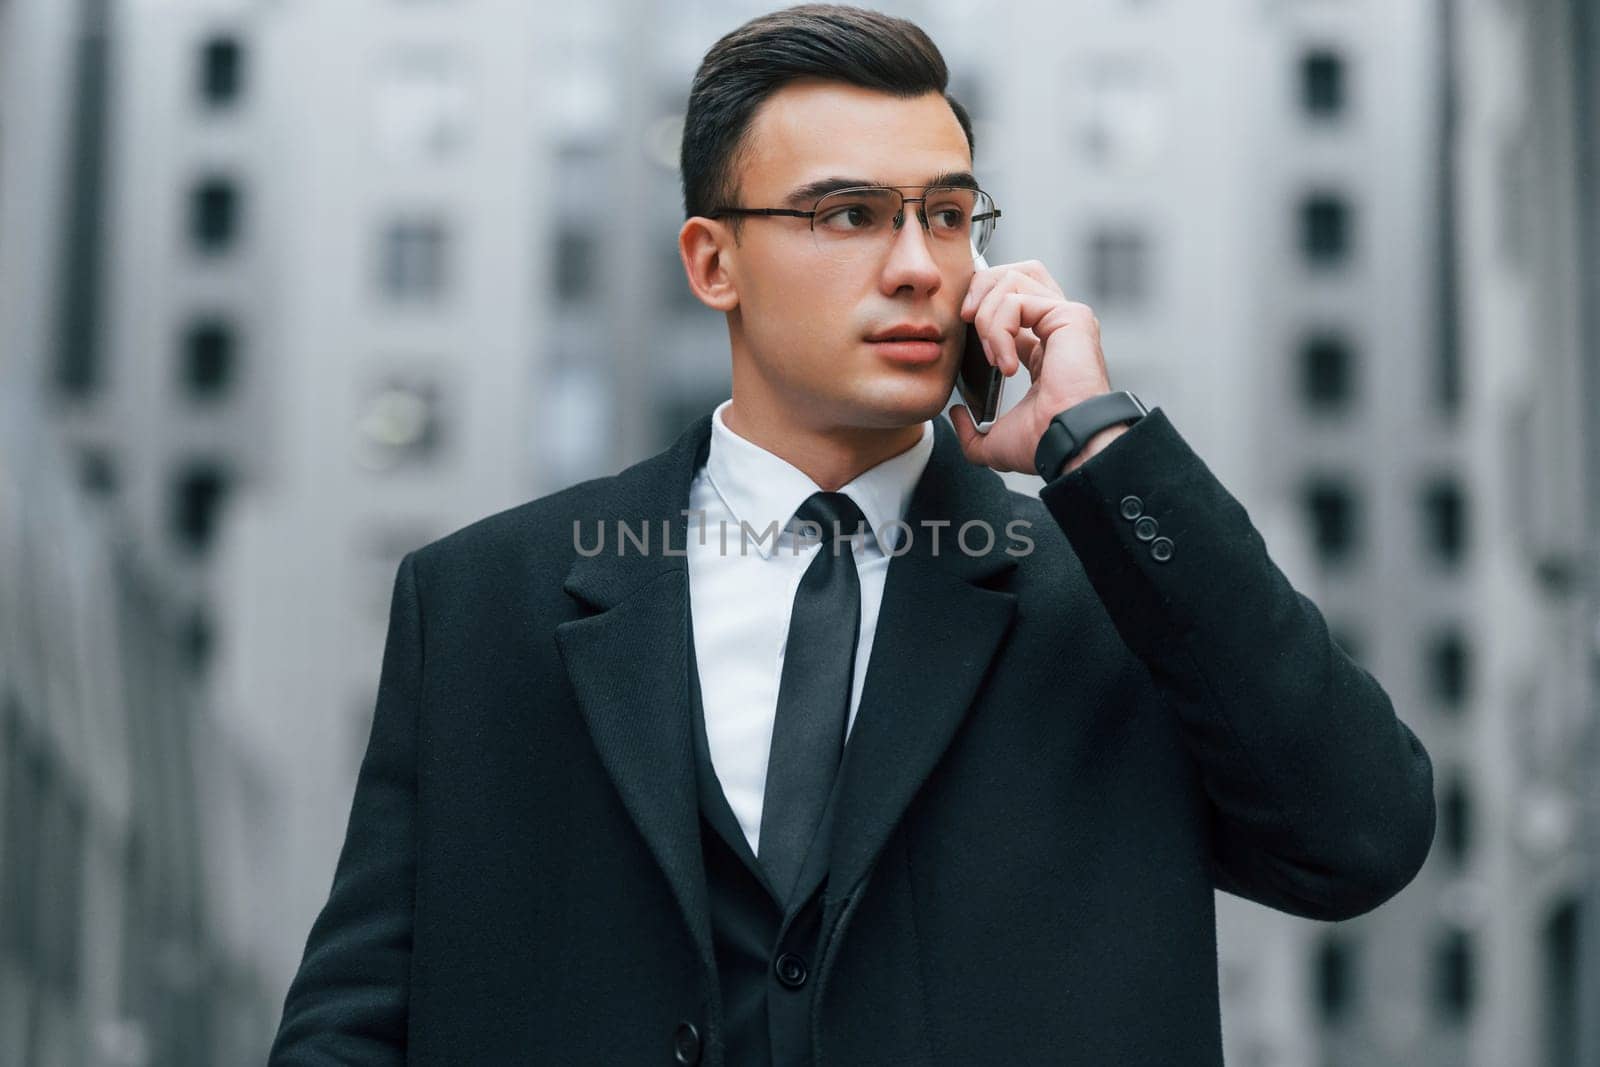 Talking by phone. Businessman in black suit and tie is outdoors in the city.